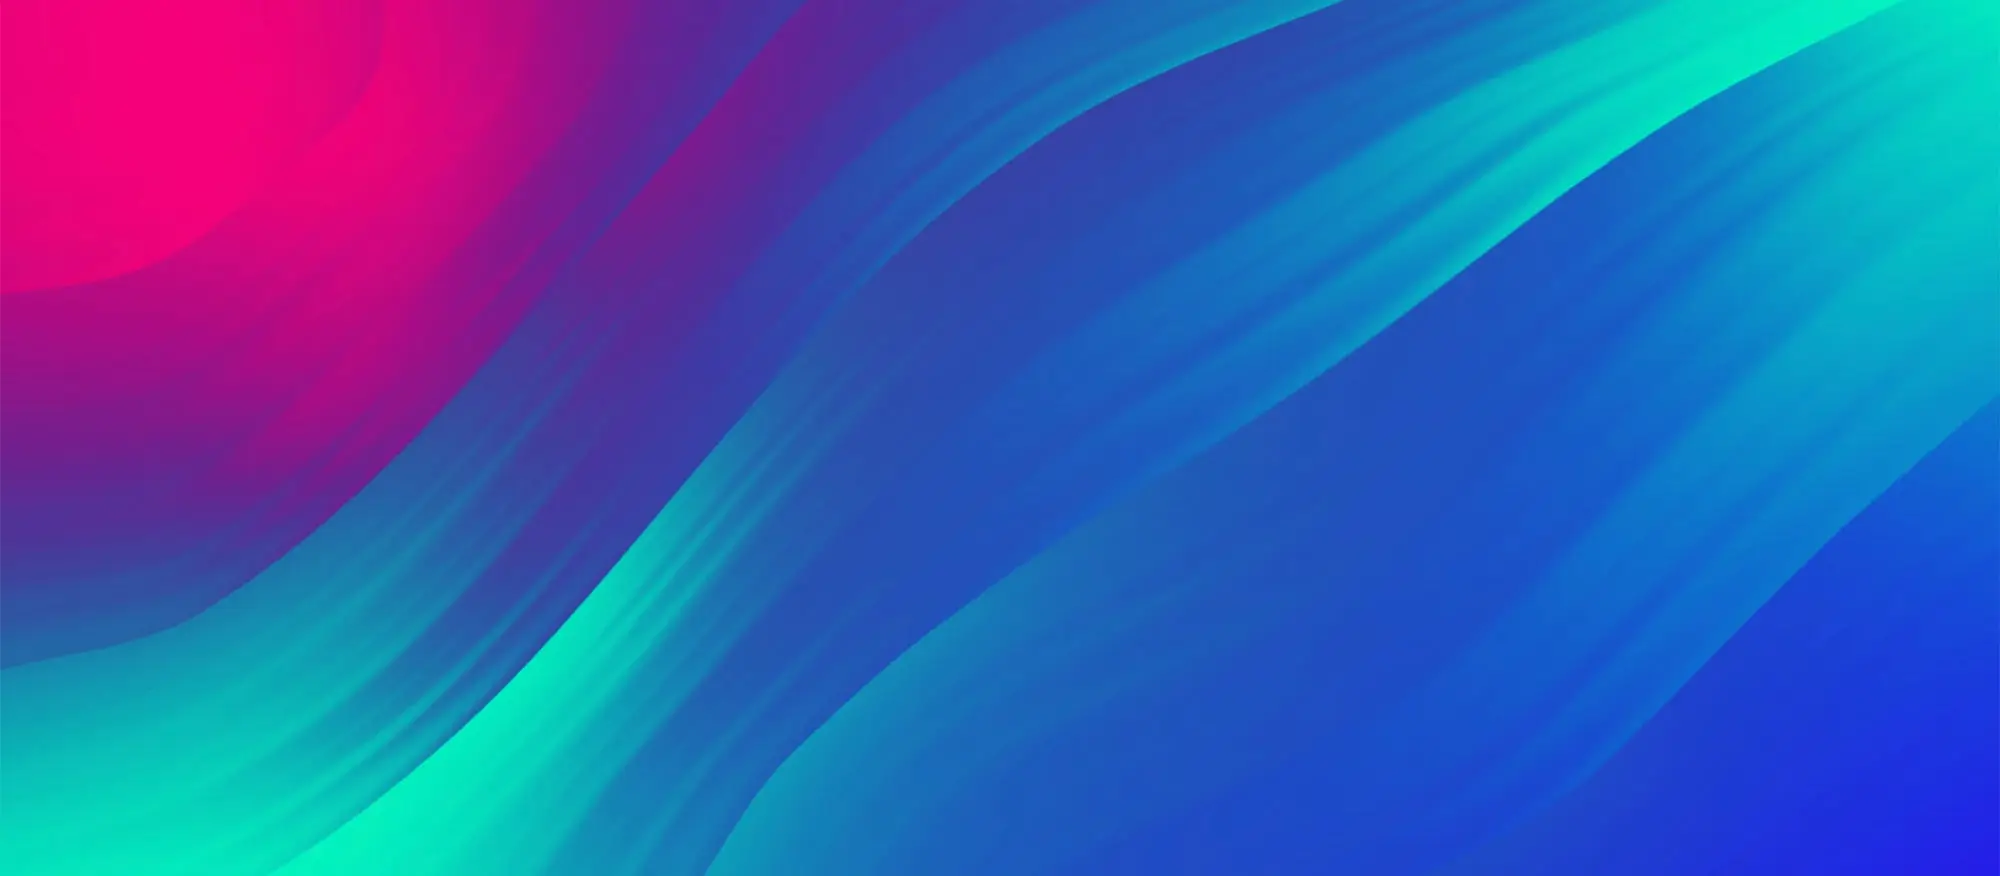 Gradient image of bright pink, greens and blues. 